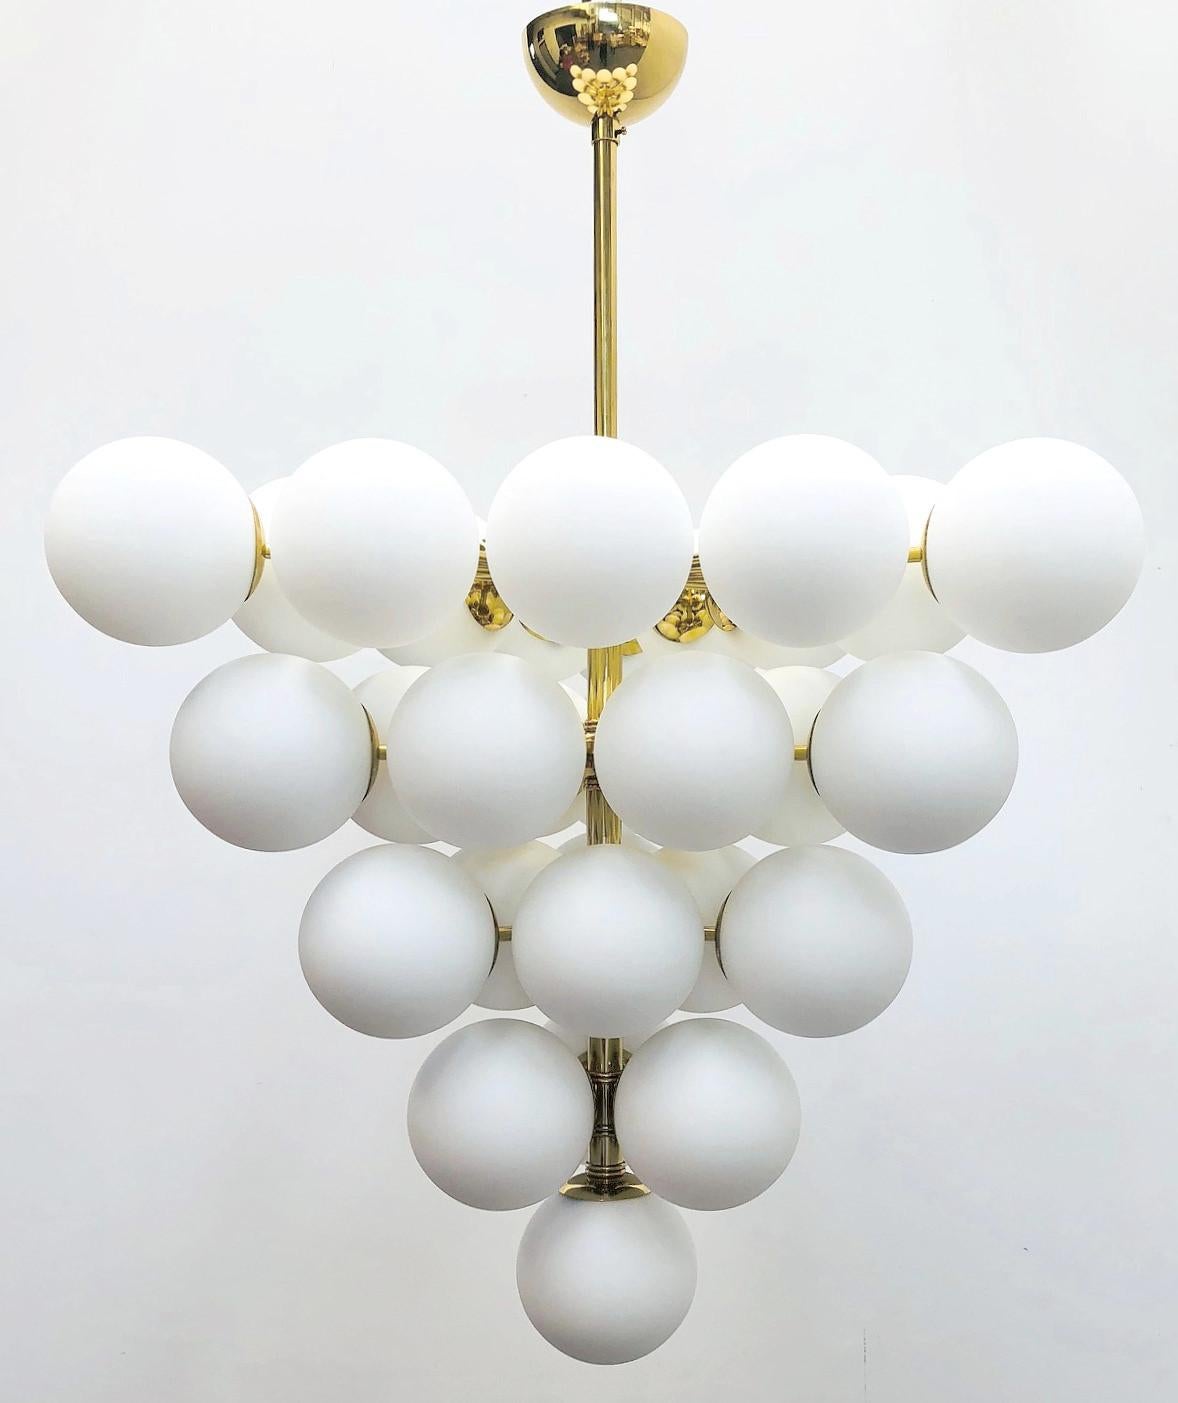 Italian chandelier with matte white Murano glass globes mounted on polished brass frame / Designed by Fabio Bergomi for Fabio Ltd / Made in Italy
31 lights / E12 or E14 type / max 40W each
Diameter: 31.5 inches  / Height: 31.5 inches not including